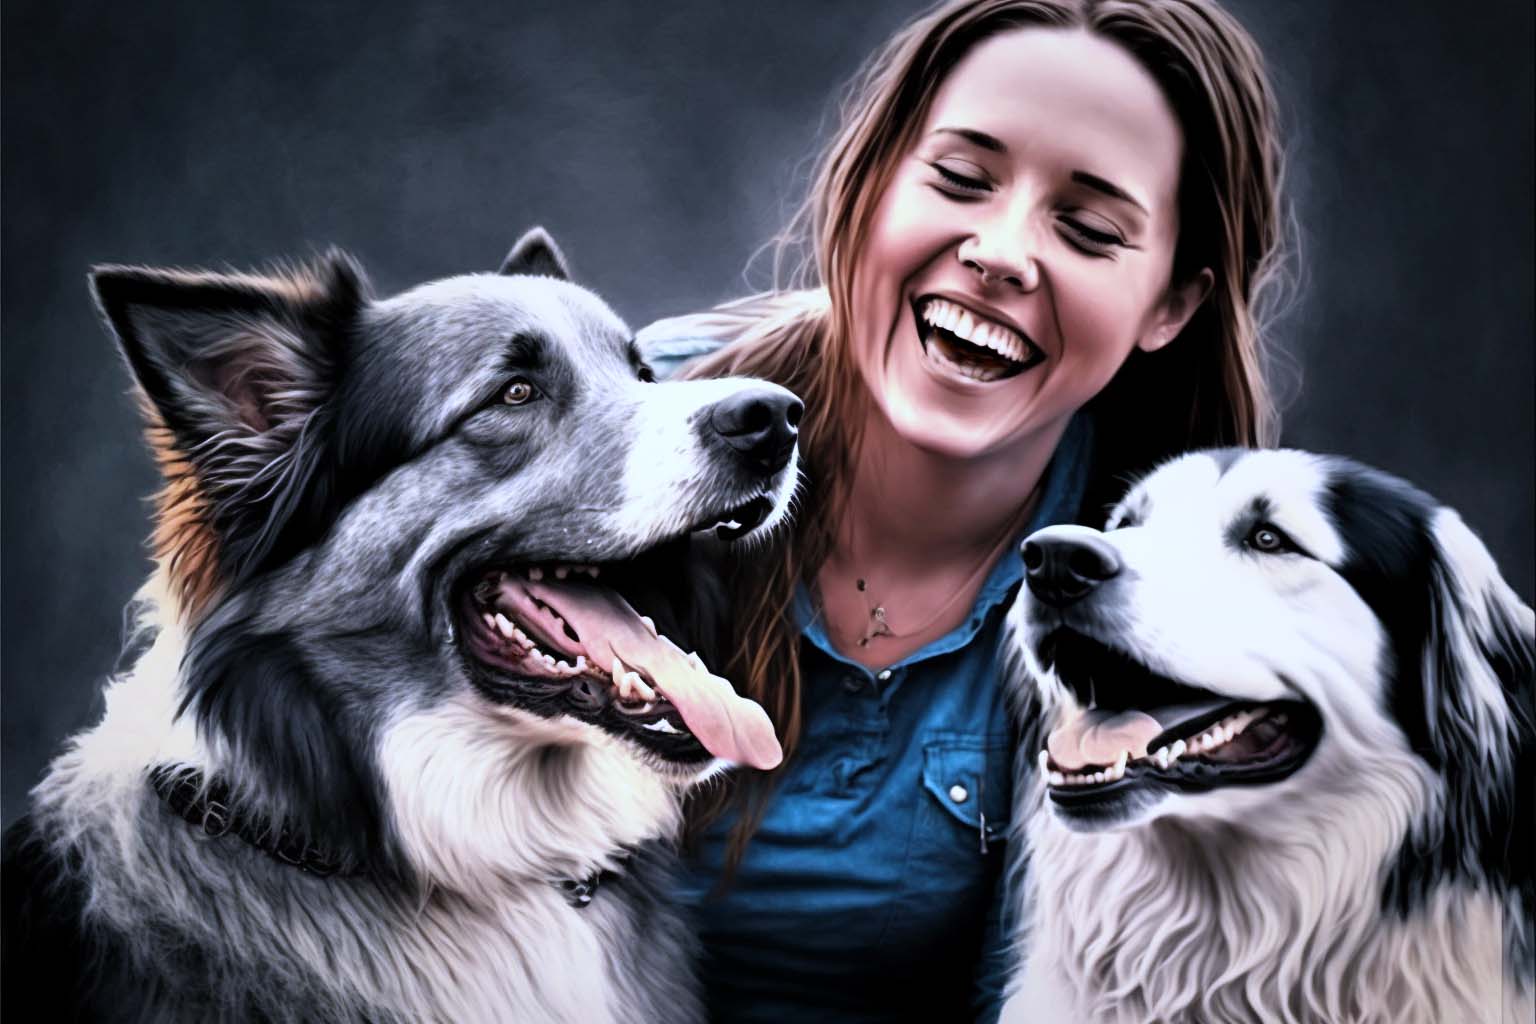 Woman laughing with her two dogs